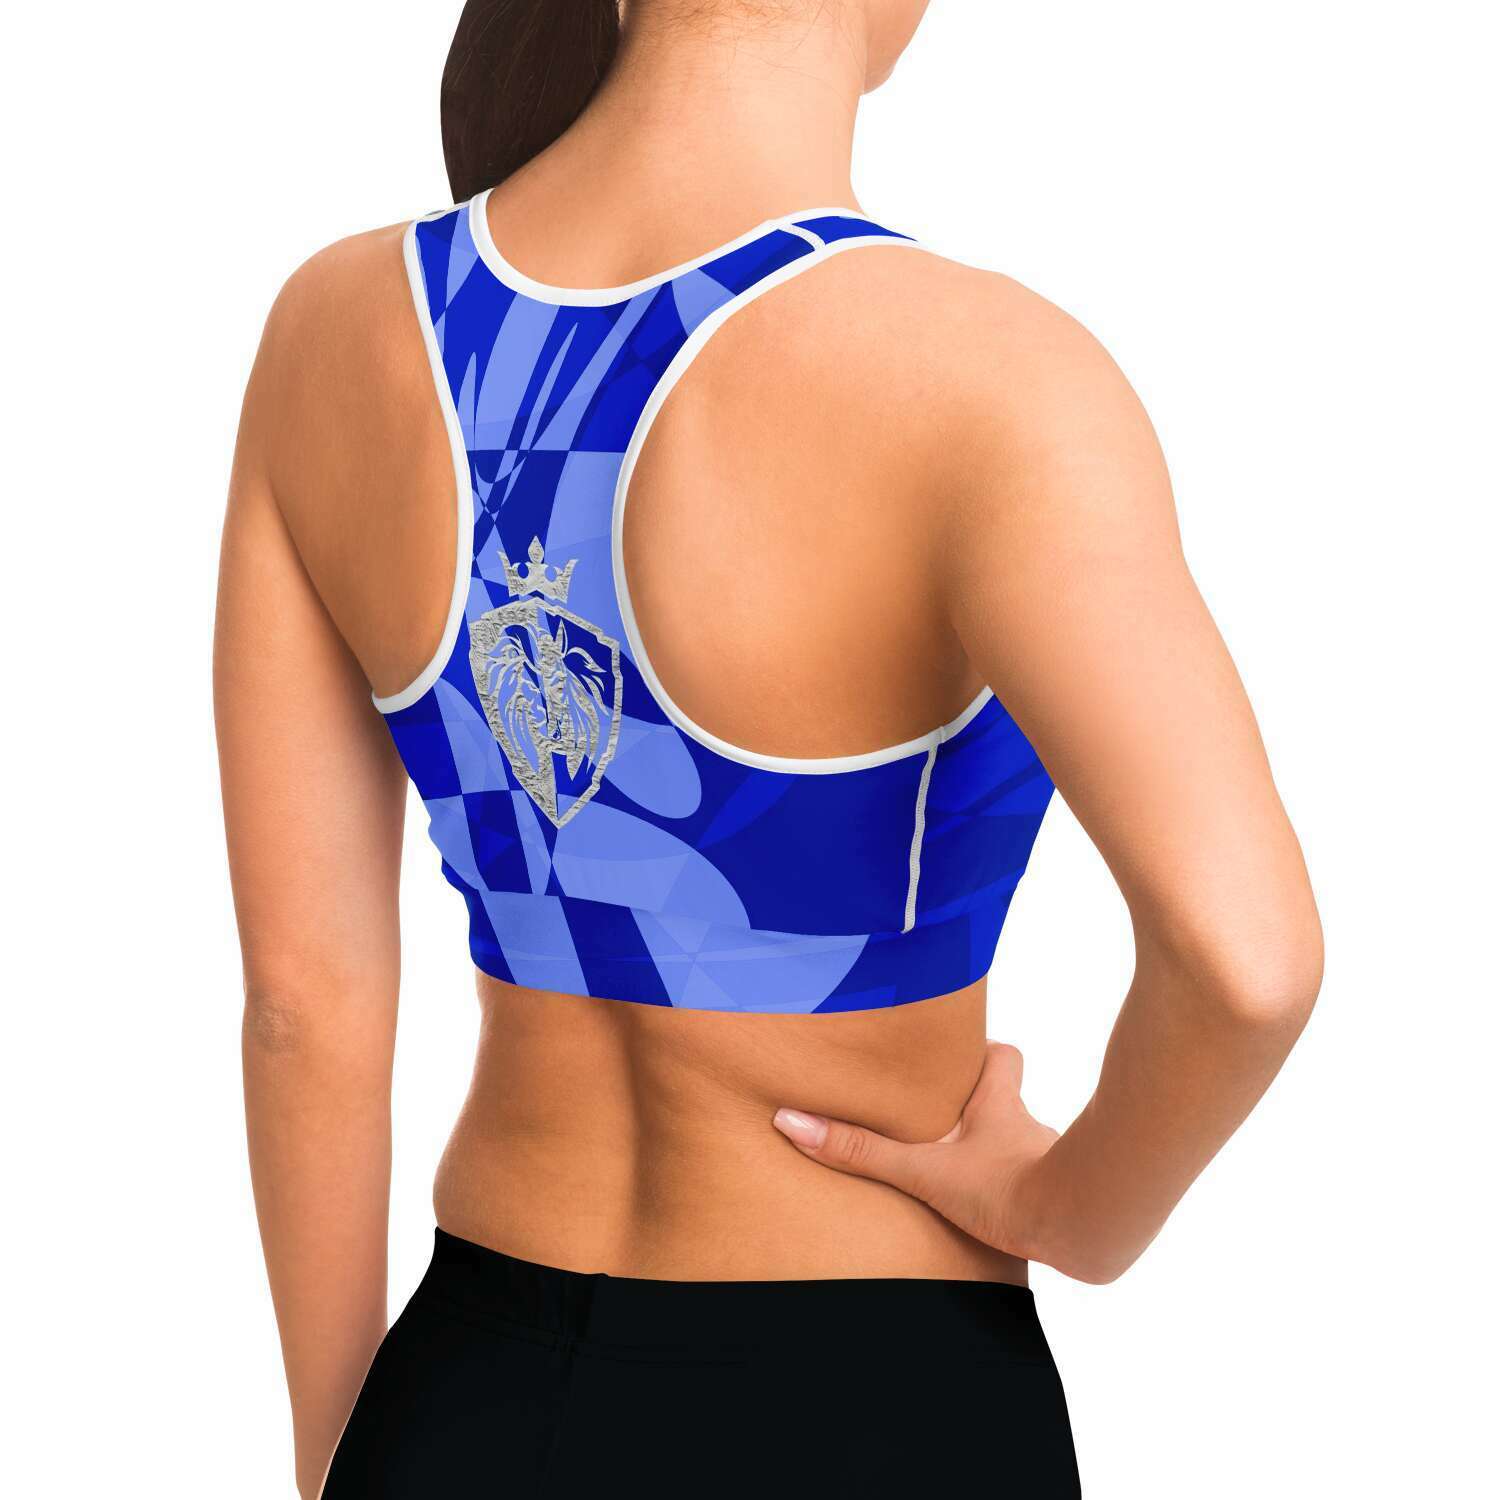 KINGBREED COLLECTION SPORTS BRA BLUE CLOUDS